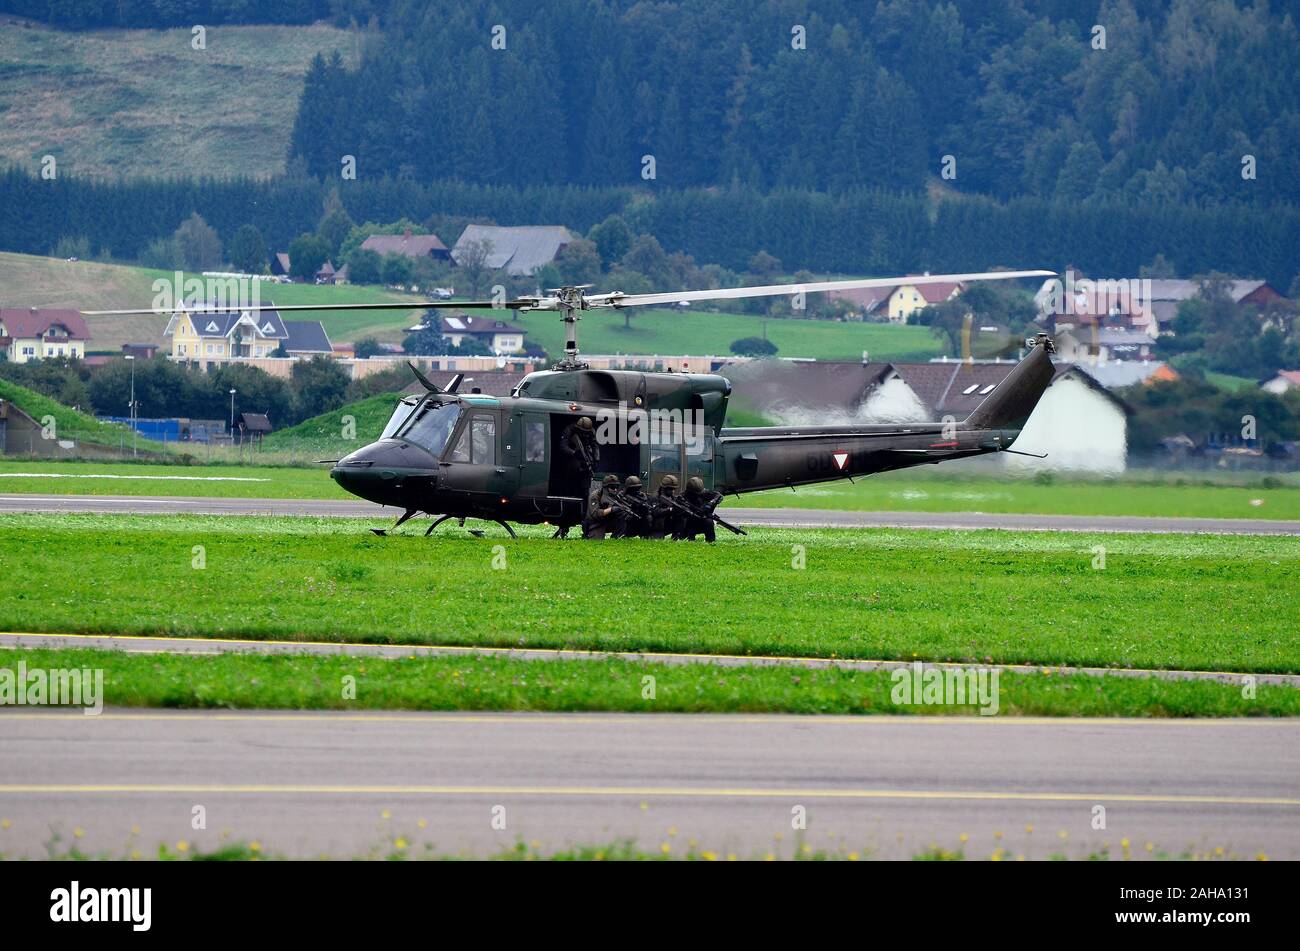 Zeltweg, Styria, Austria - September 02, 2016:  Field exercise with  Bell Augusta helicopter by public airshow named airpower 16 Stock Photo